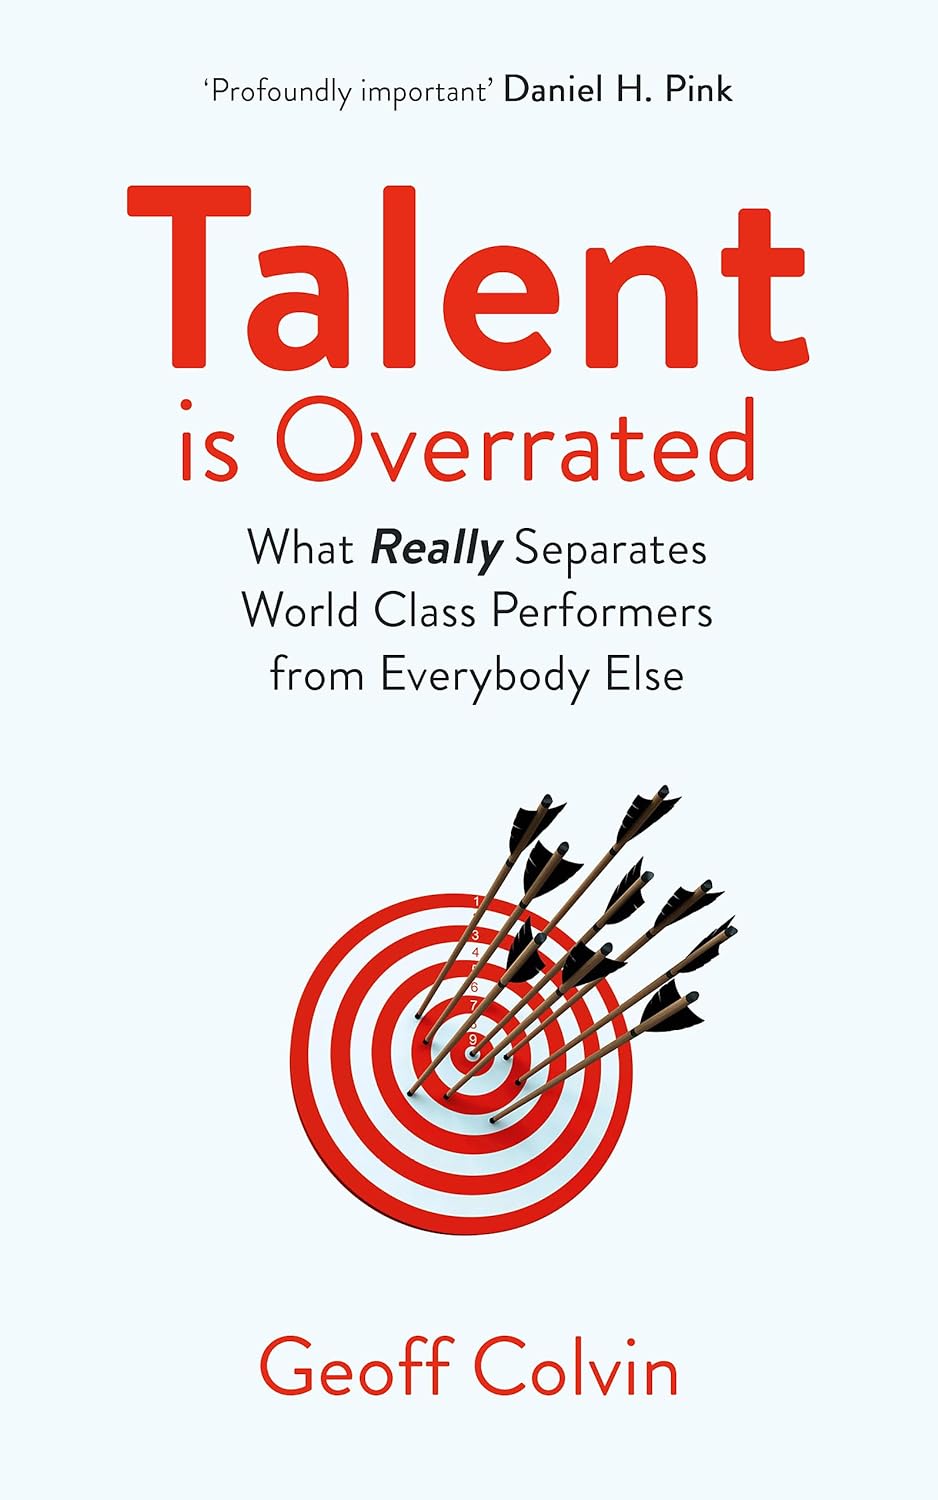 Talent Is Overrated by Geoff Colvin